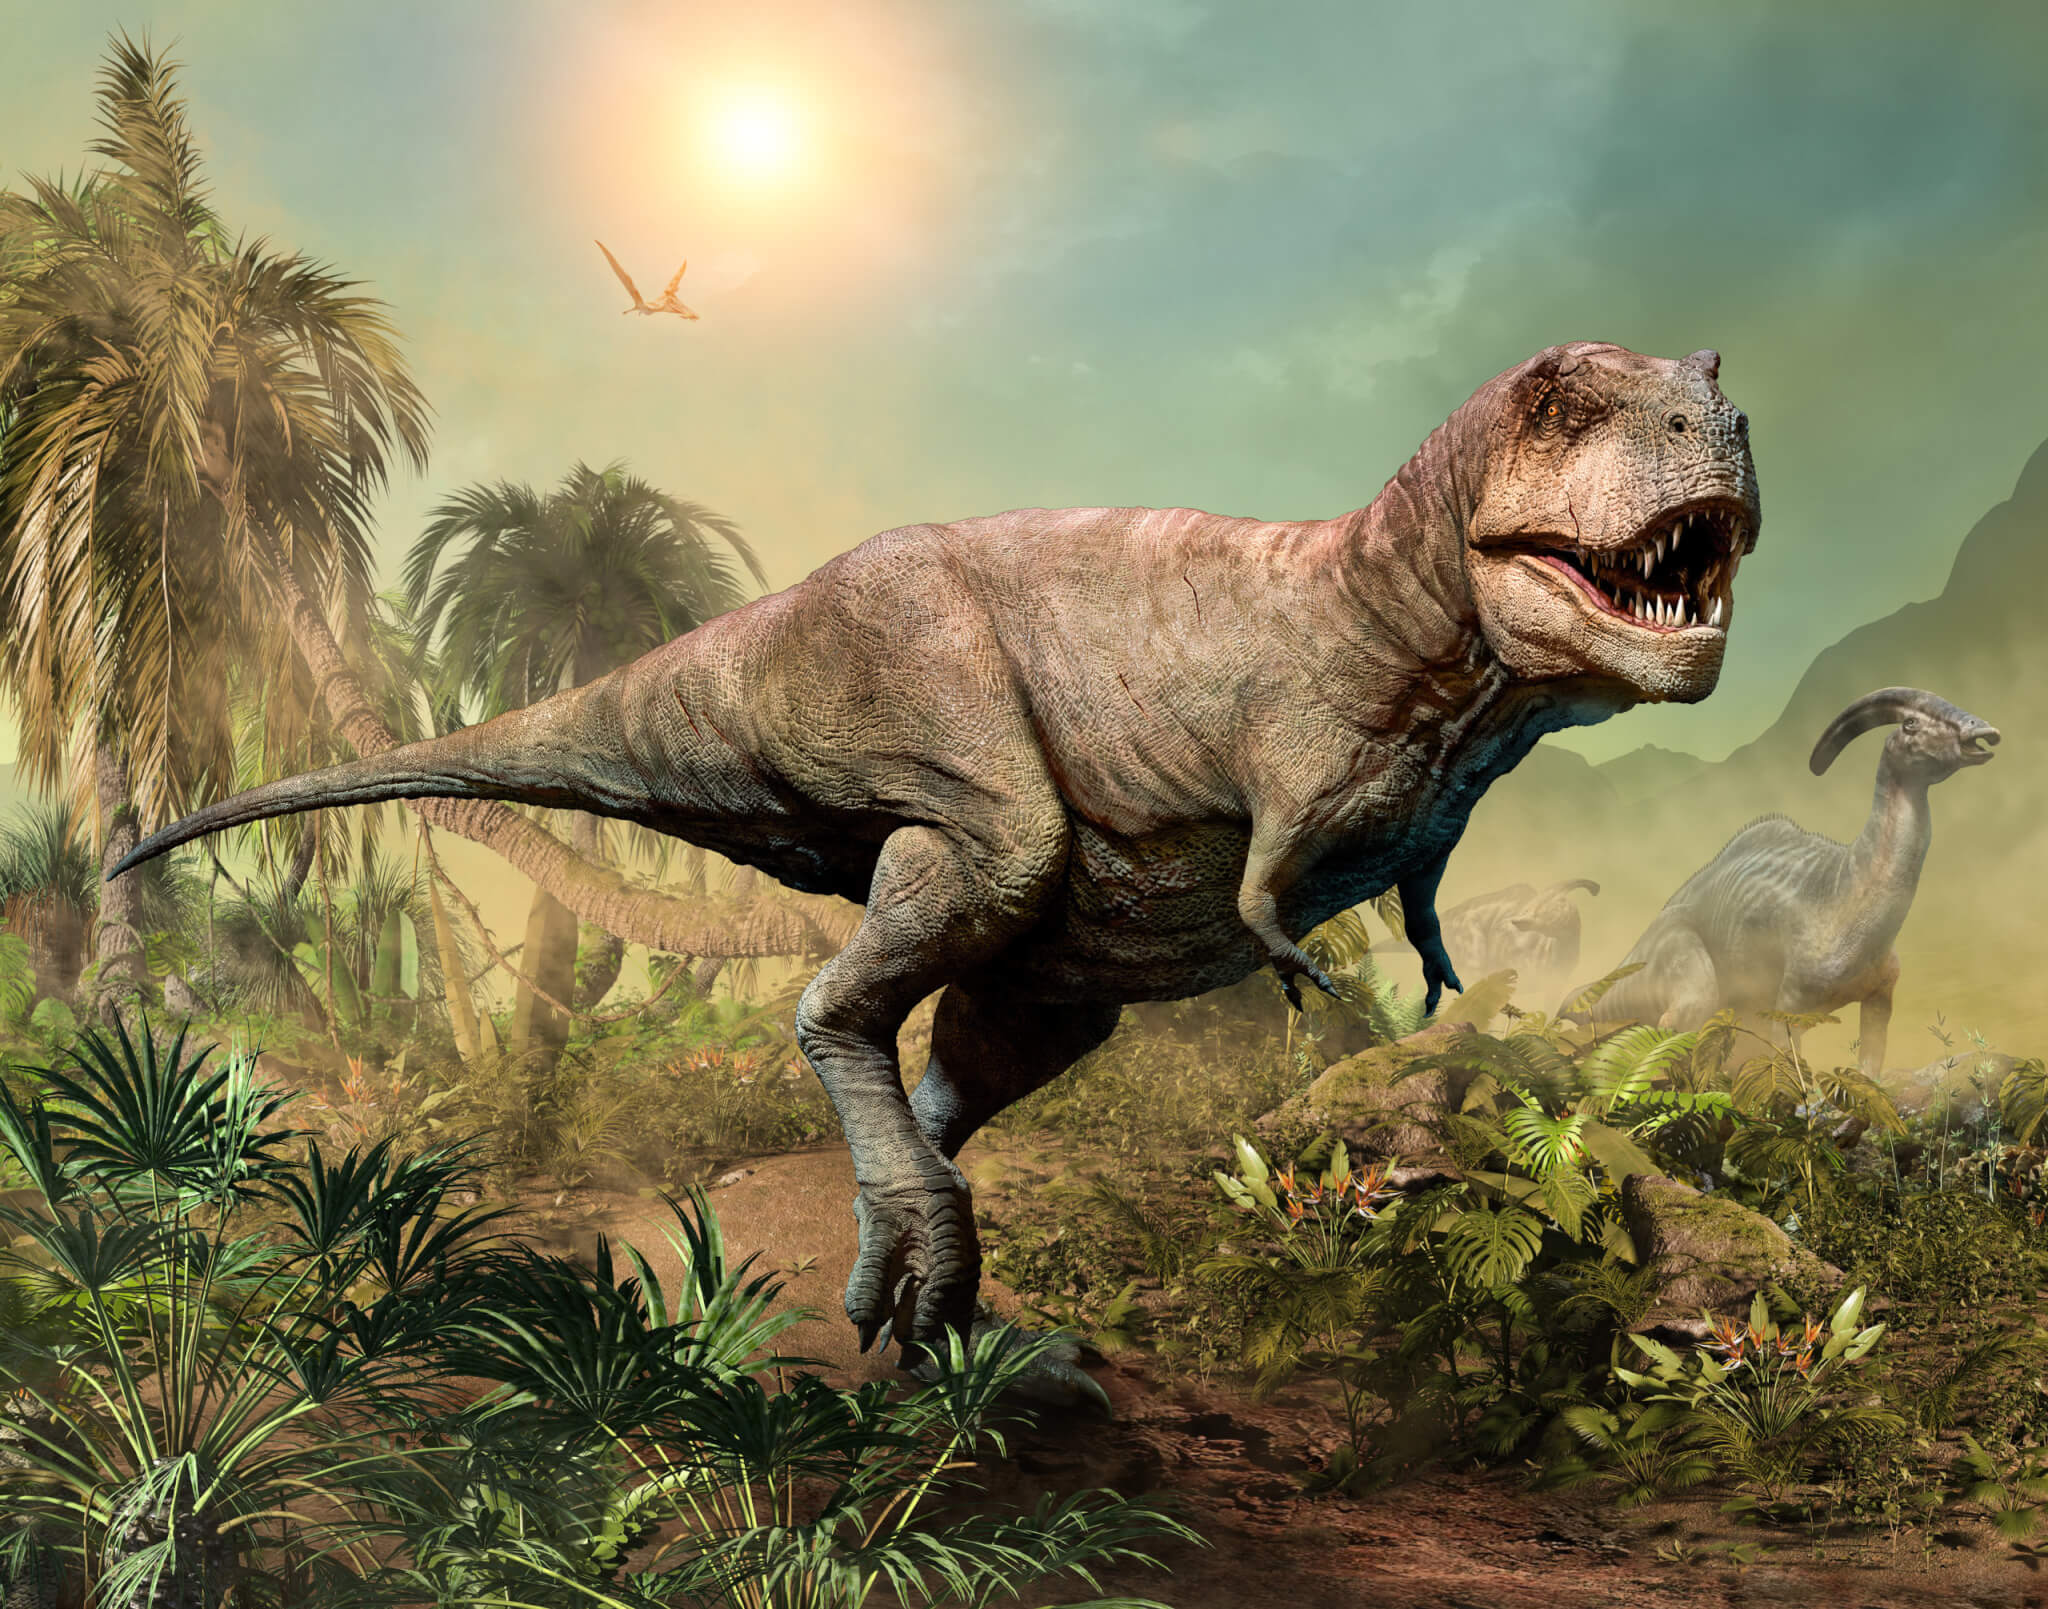 Why did the monstrous T. rex have such tiny arms? – TrendRadars